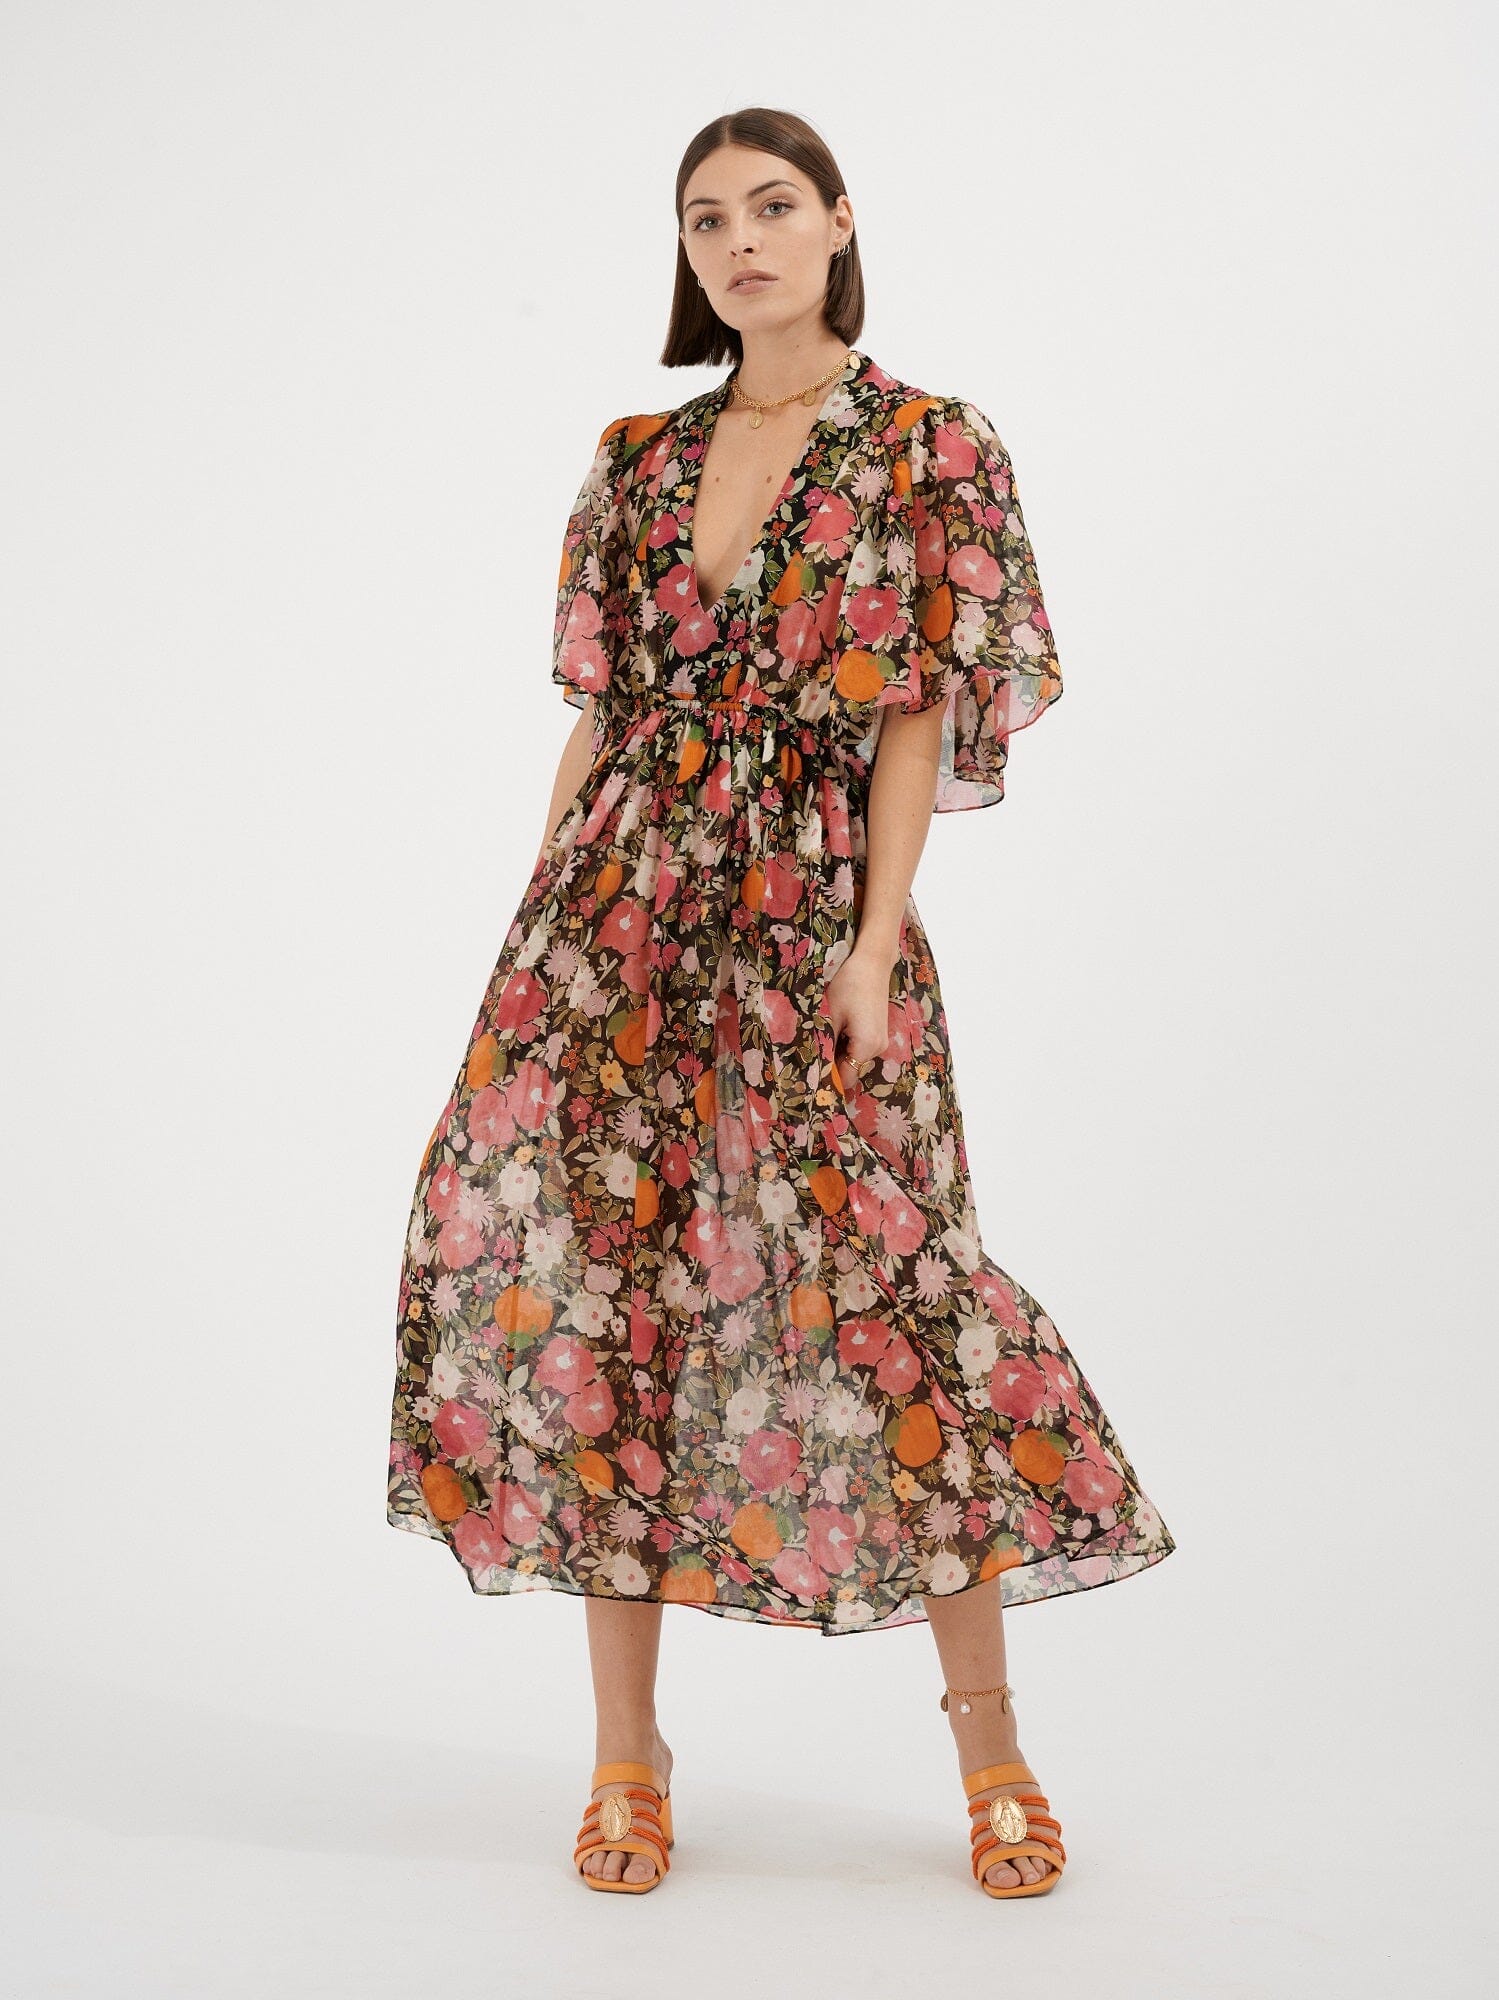 ZICAVO - Steamy Maxi Dress in Cotton and Printed Silk Immortelles Dress Fête Impériale